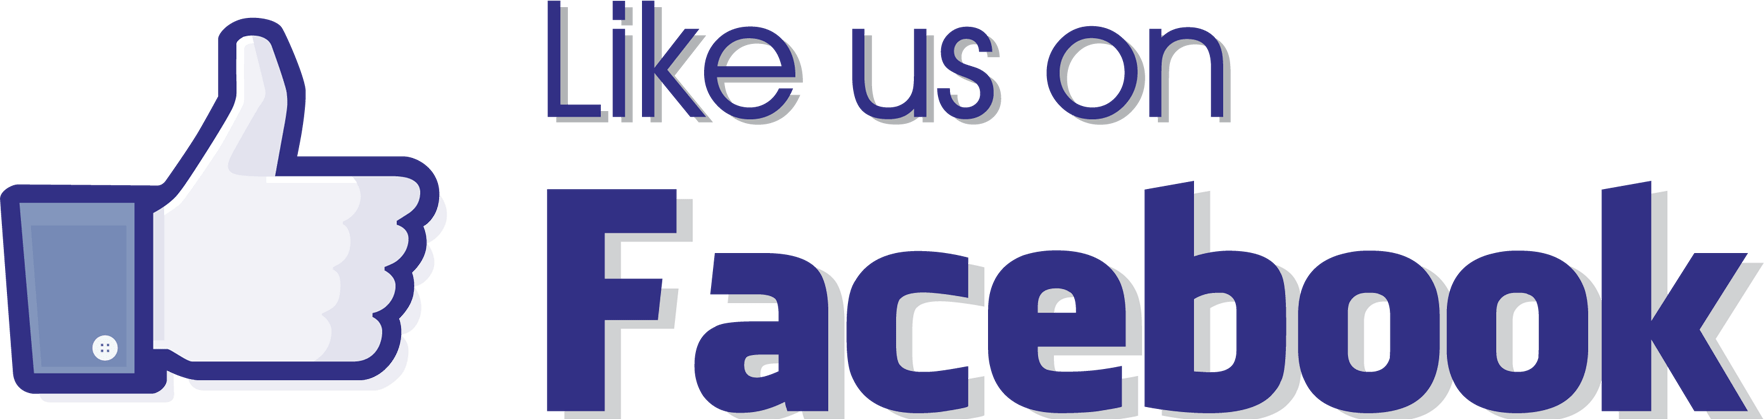 Facebook Like Us On Facebook Button (1764x419)